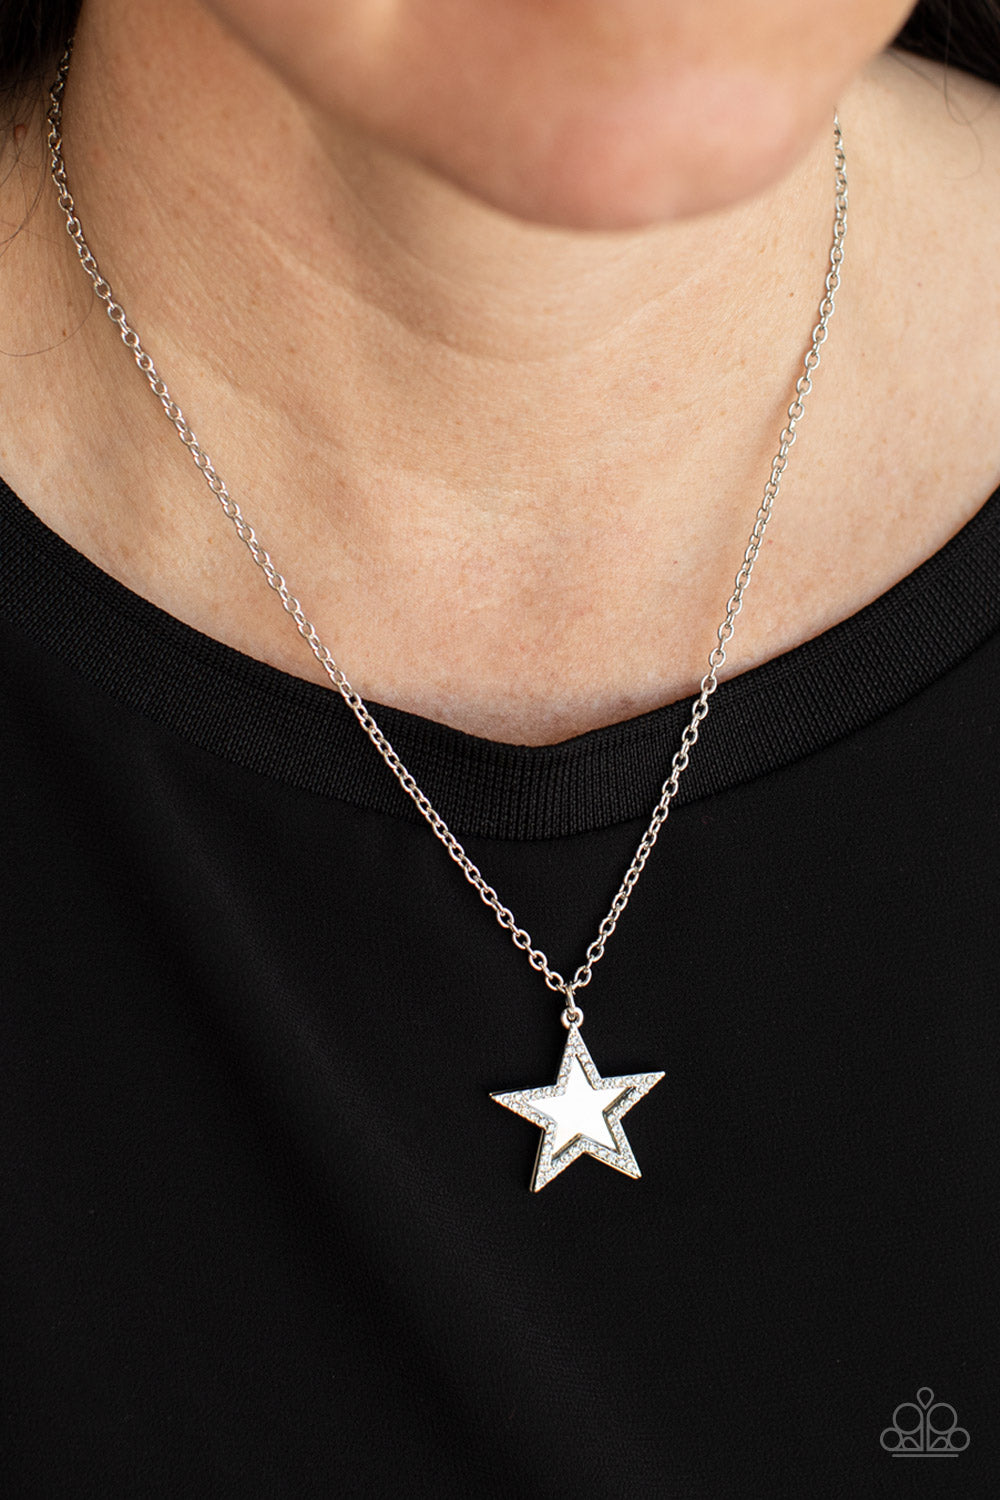 silver, silver jewelry, necklace, medium necklace, star, star jewelry, affordable jewelry, paparazzi accessories, everyday jewelry, fourth of july jewelry, holiday jewelry, affordable gift, 